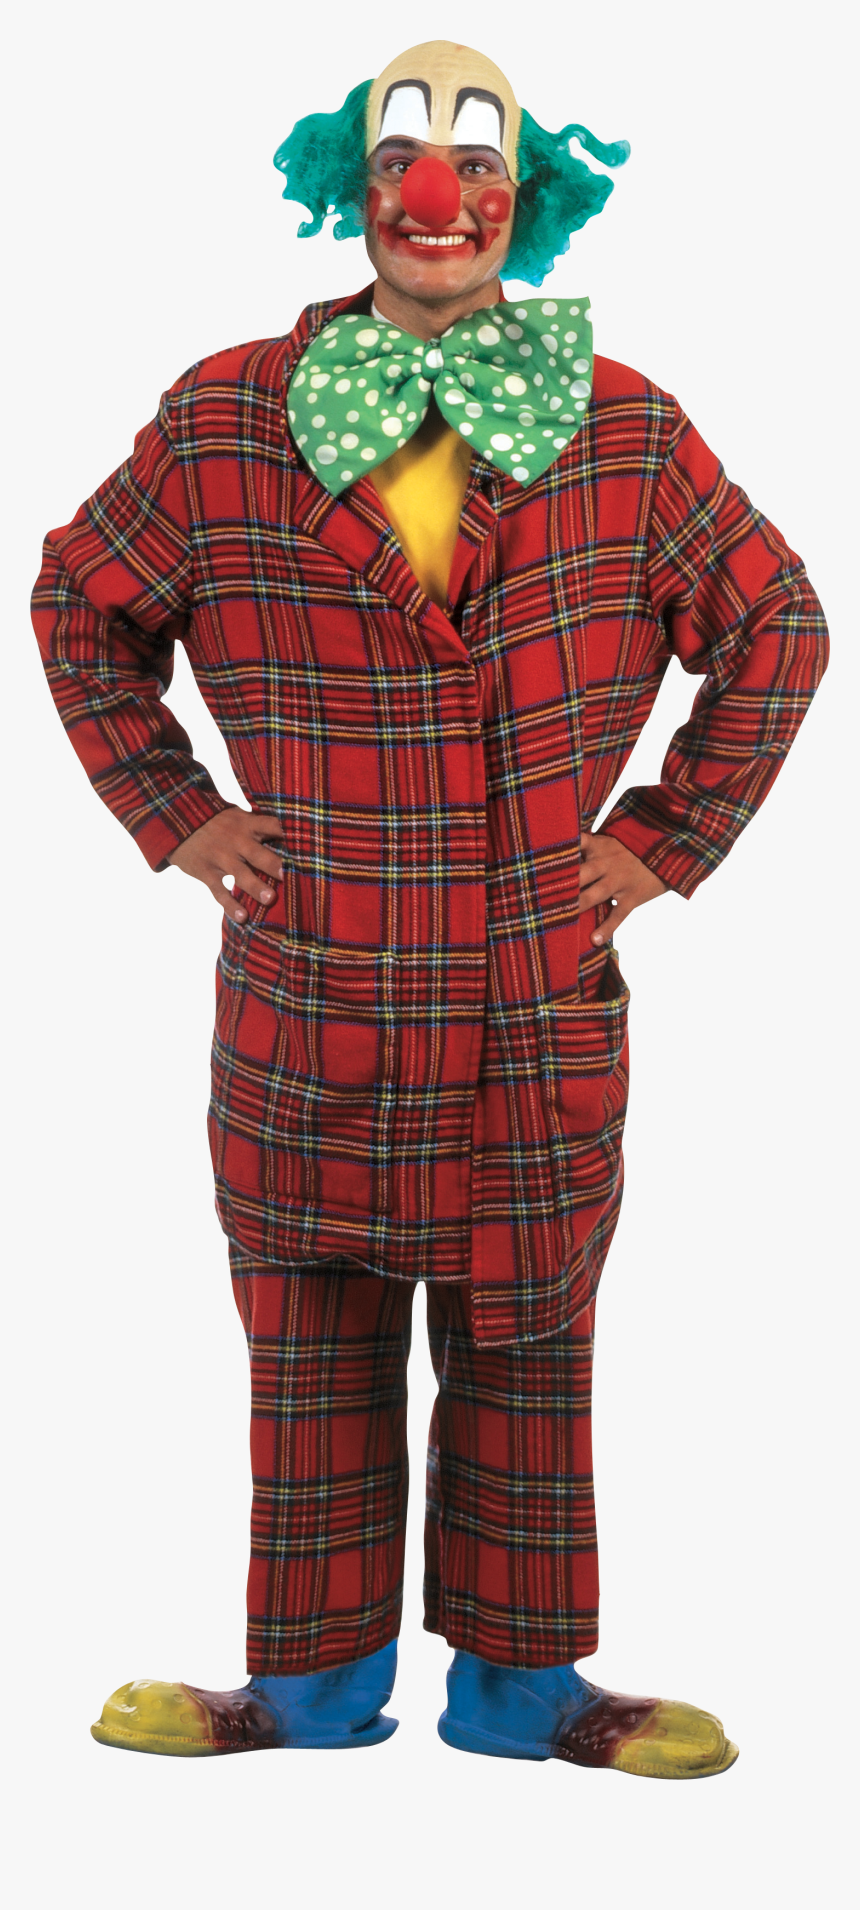 Clown - Clown In Plaid Suit, HD Png Download, Free Download